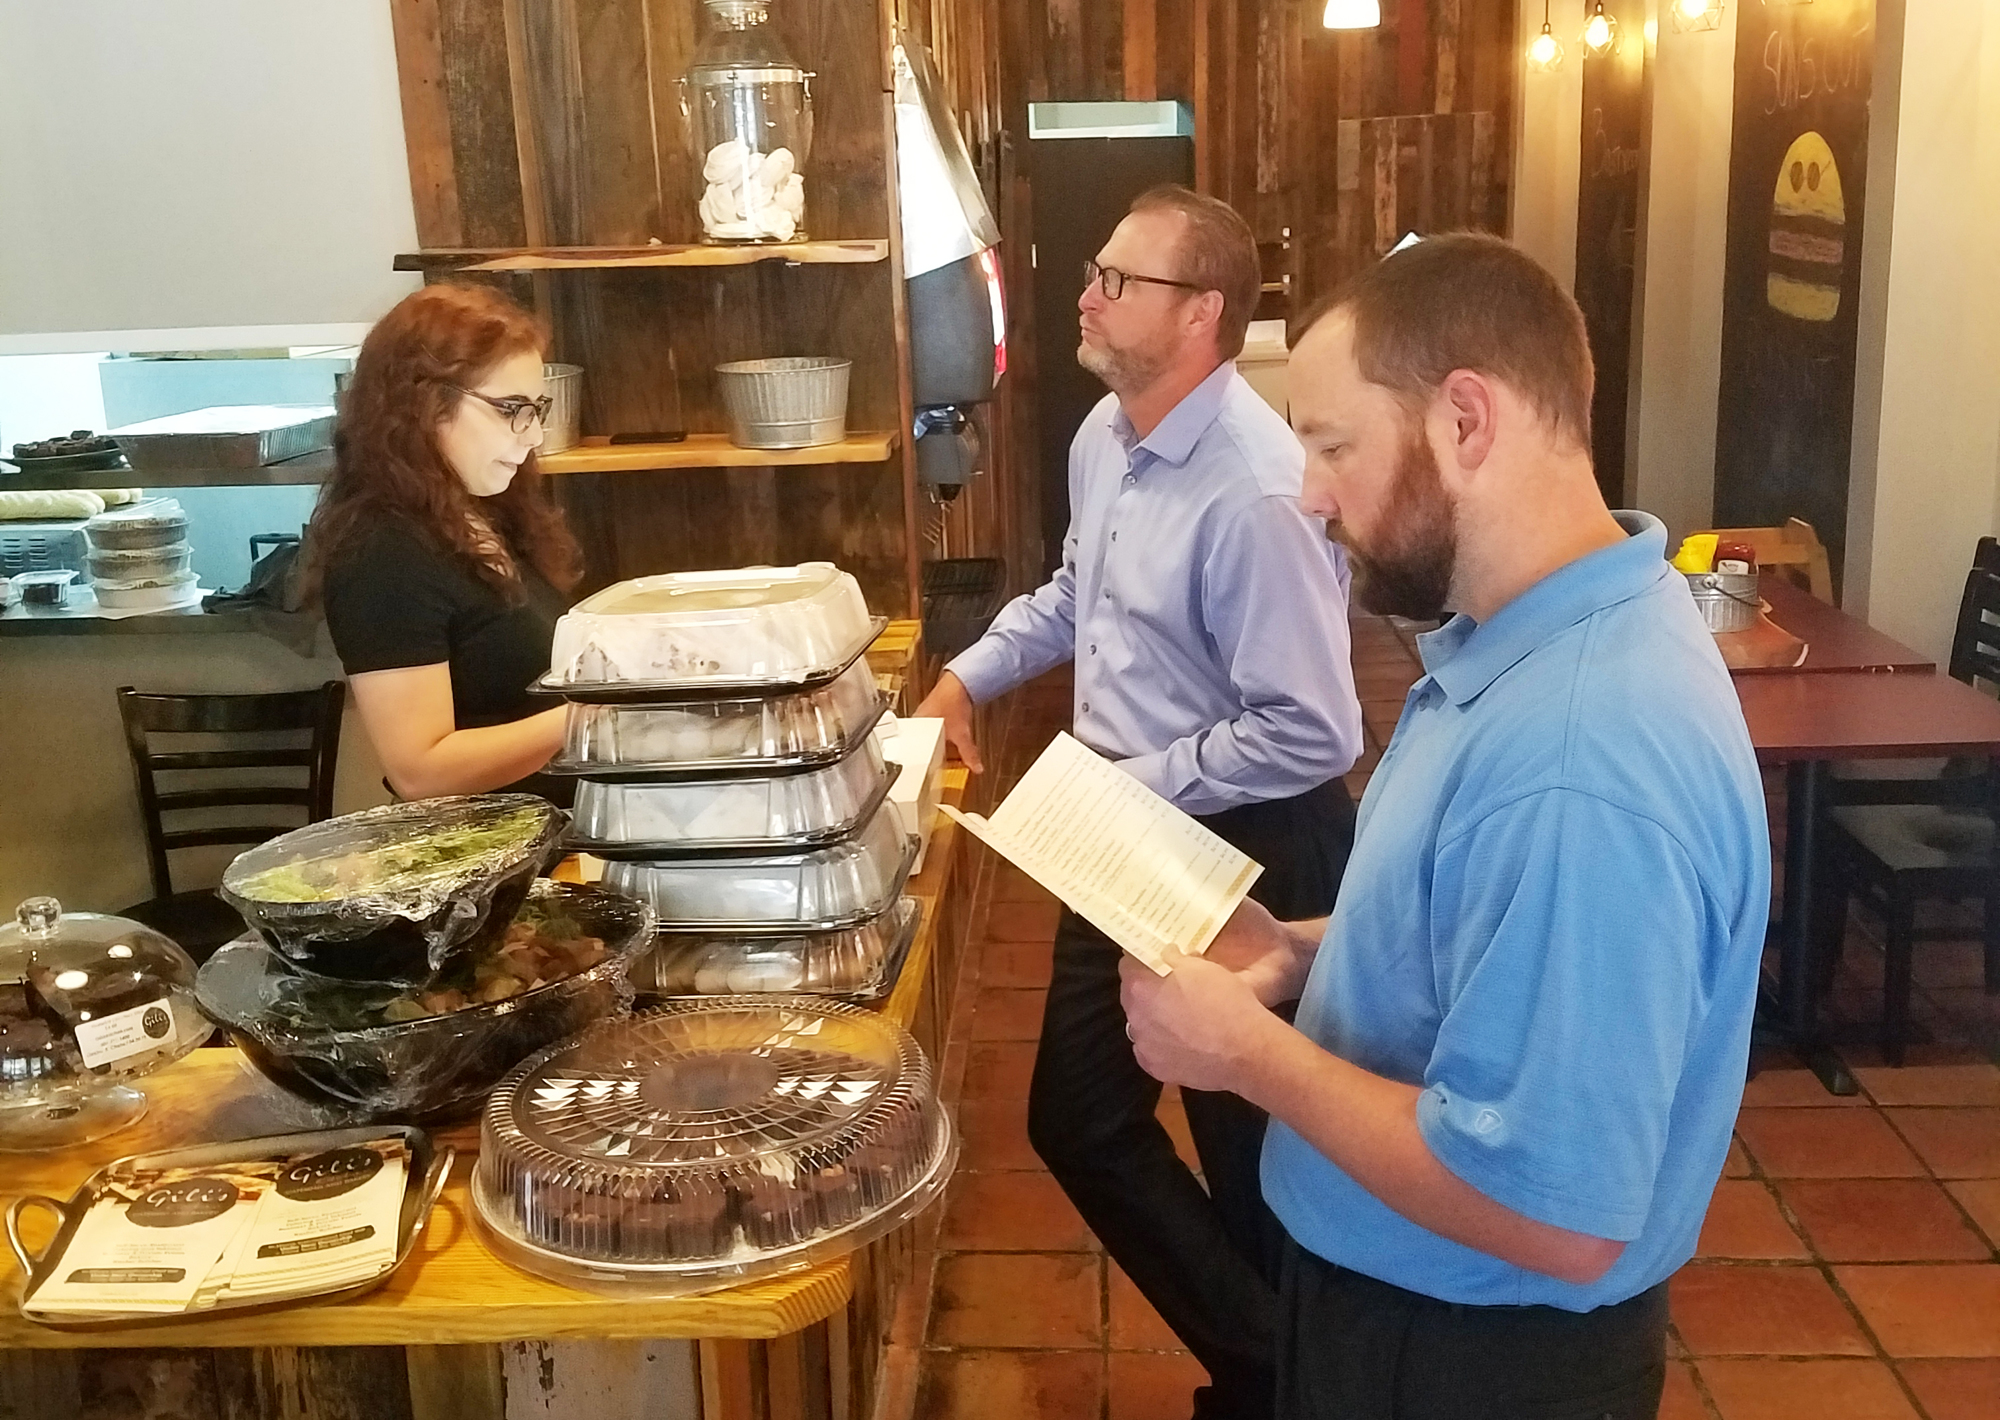 Elly Ben Simon of Gili’s Kitchen takes orders from customers Brian Griner and Justin Jennings in the new Downtown restaurant at 126 W. Adams St. that features kosher preparation of international and American cuisine.